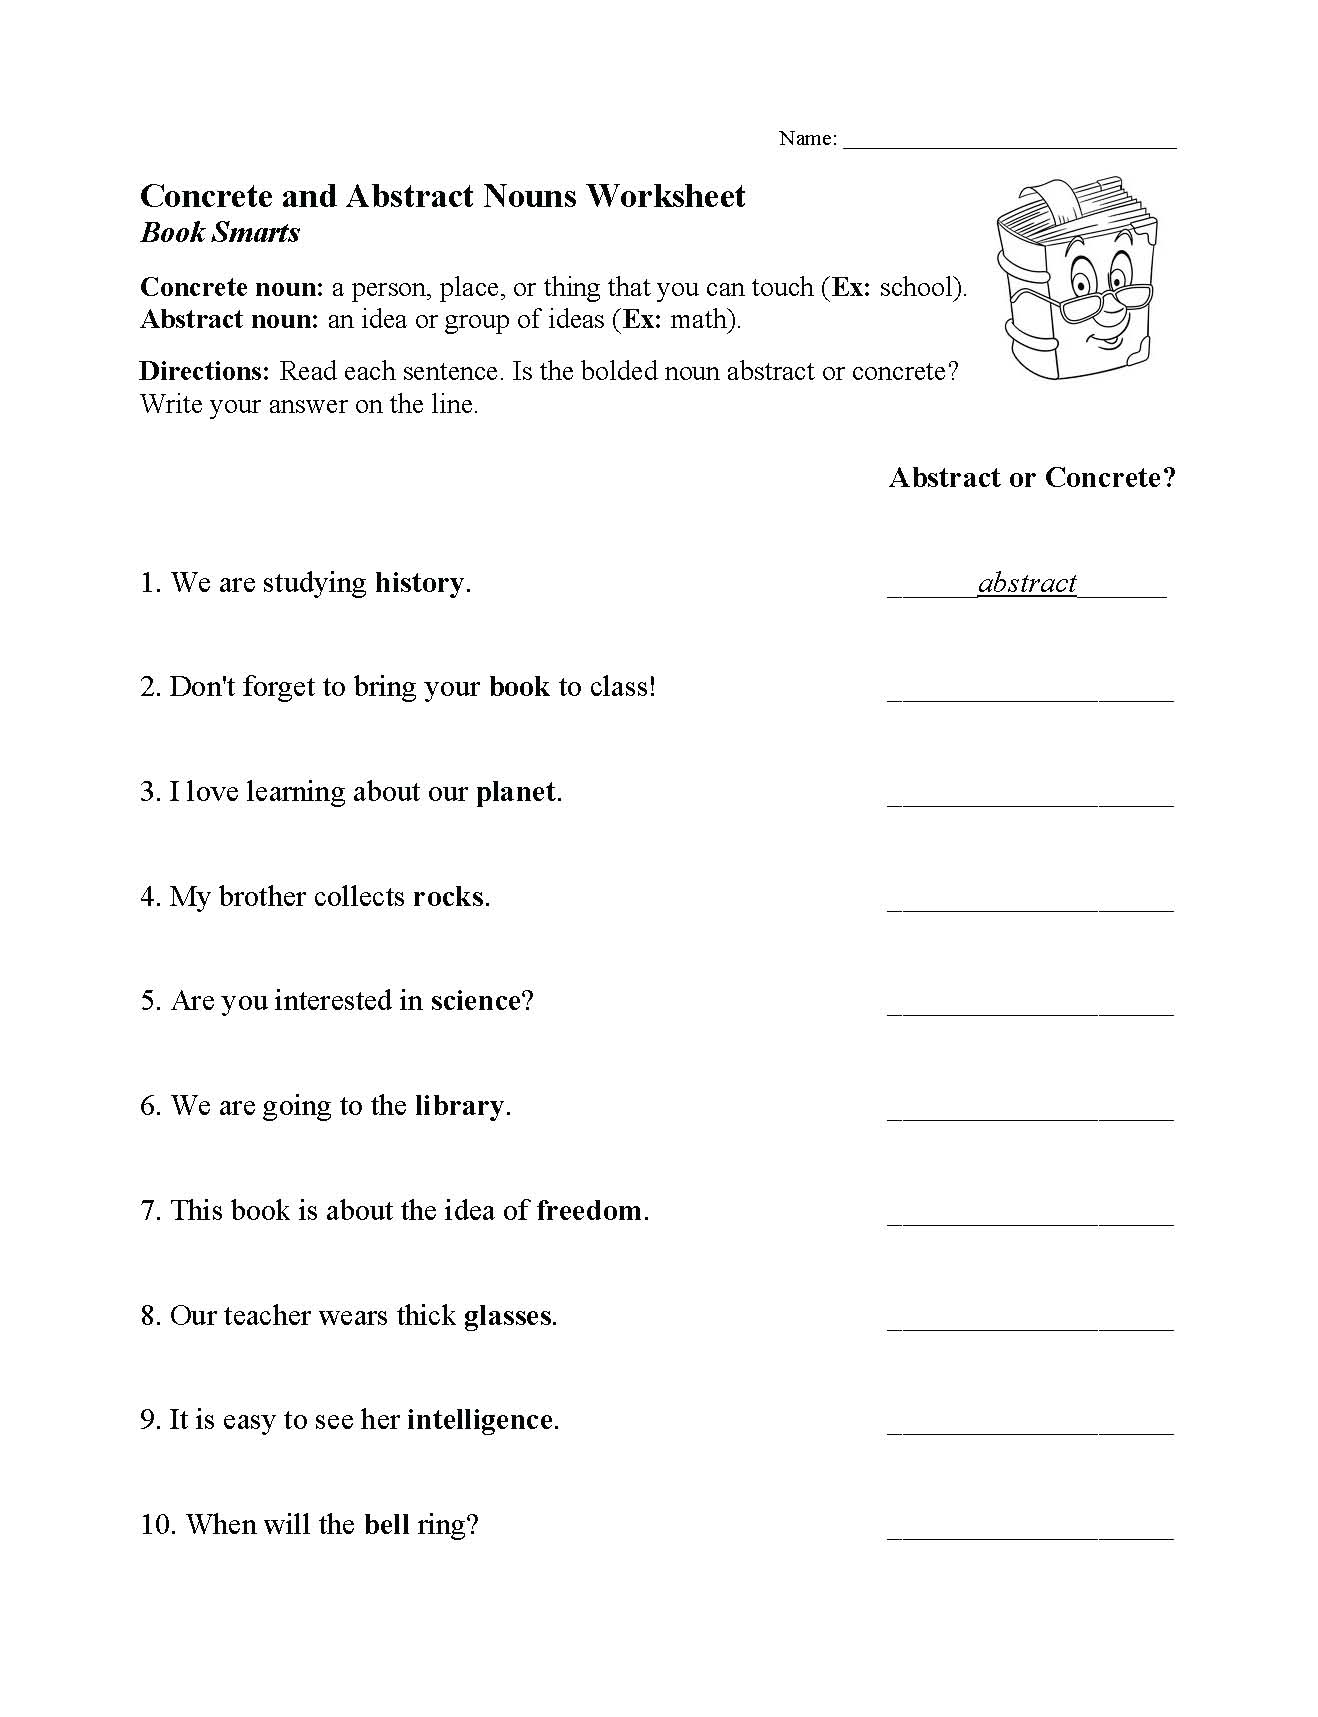 Abstract And Concrete Nouns Worksheet